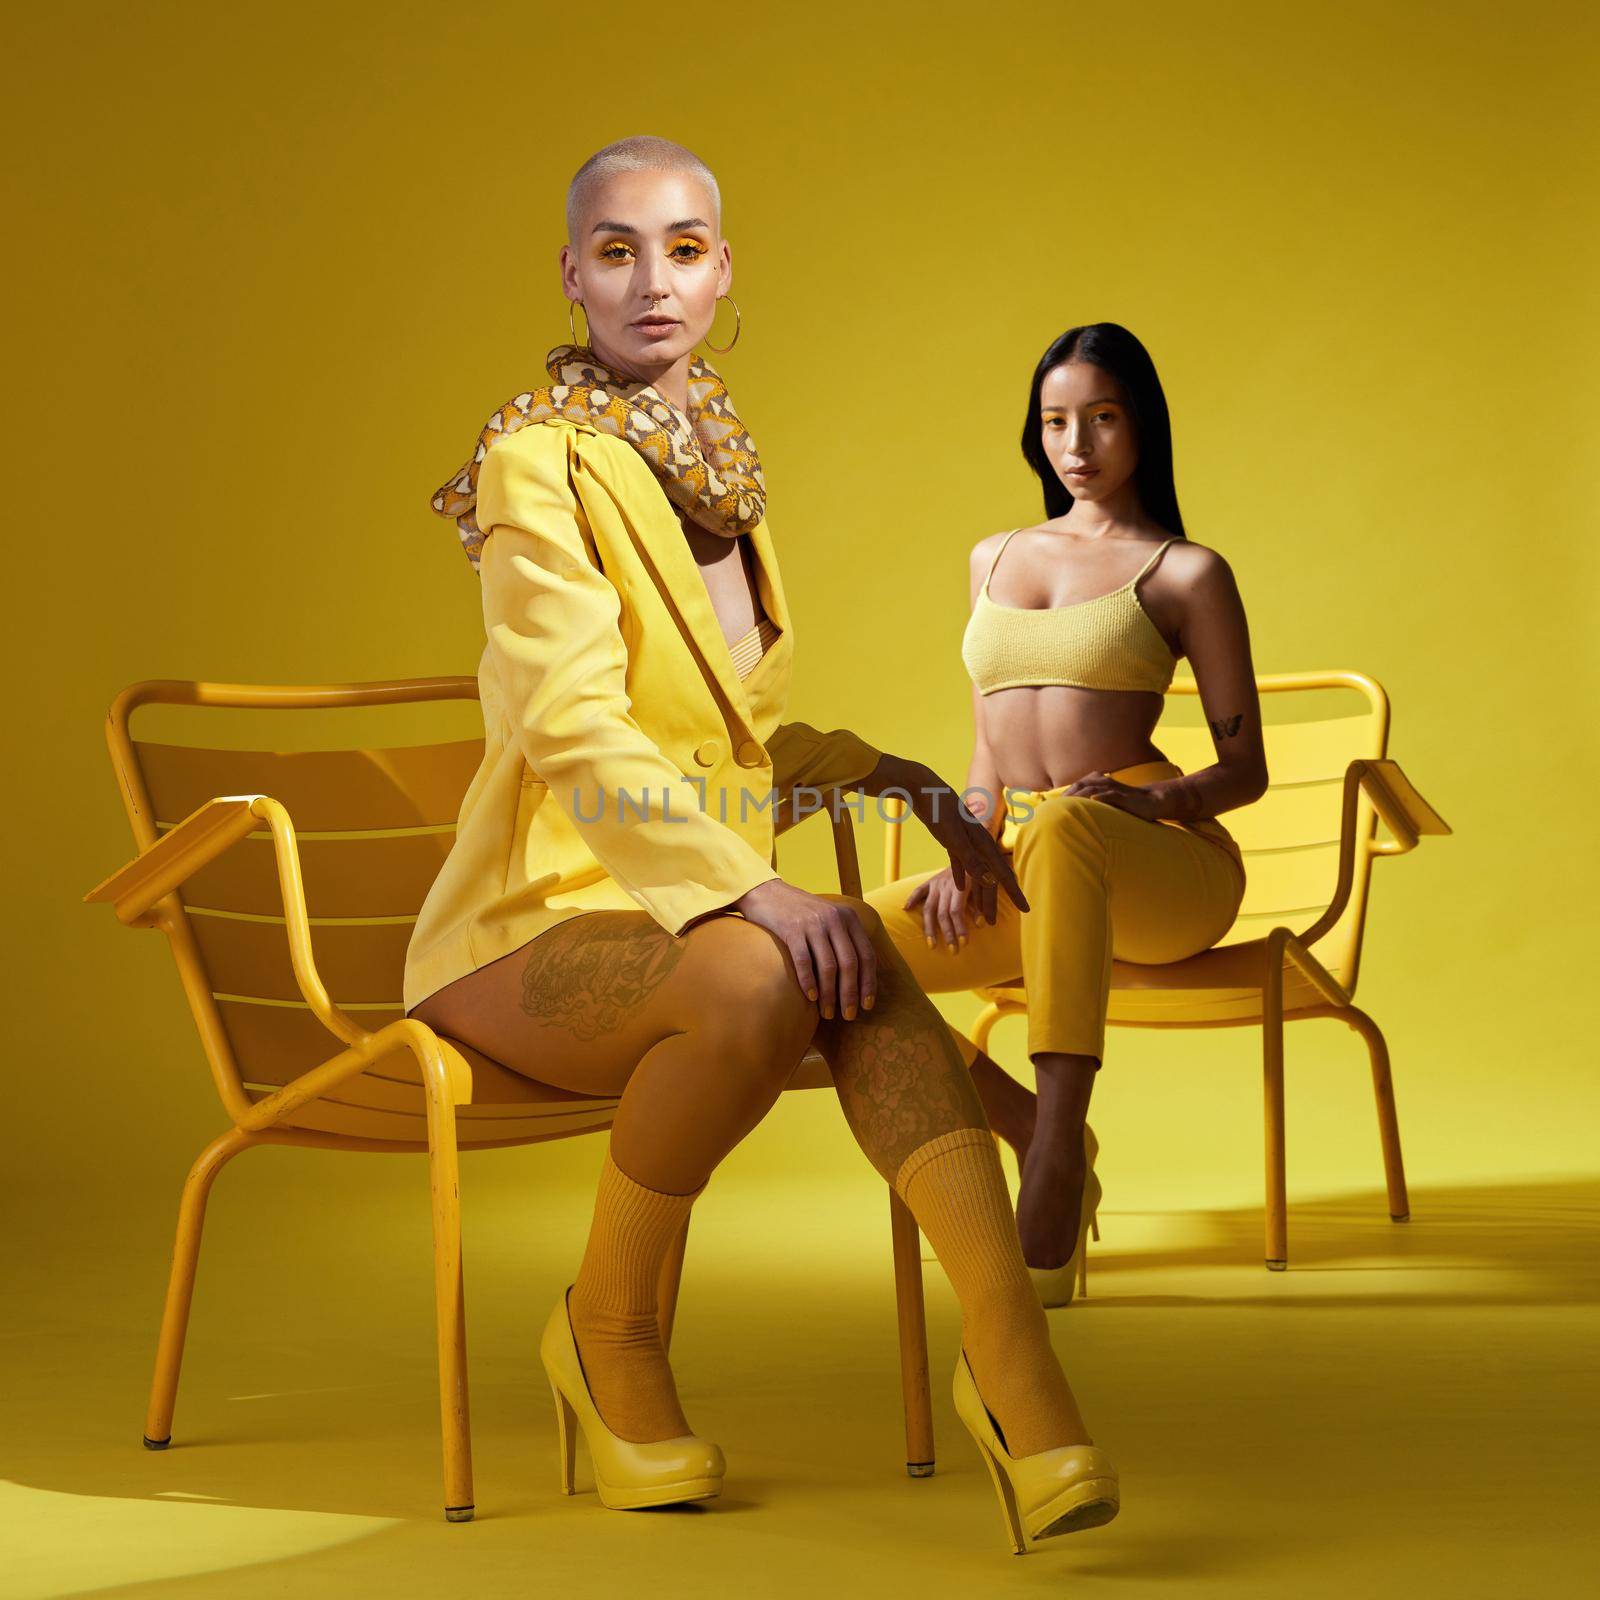 Shot of two women dressed in stylish yellow clothes against a yellow background.